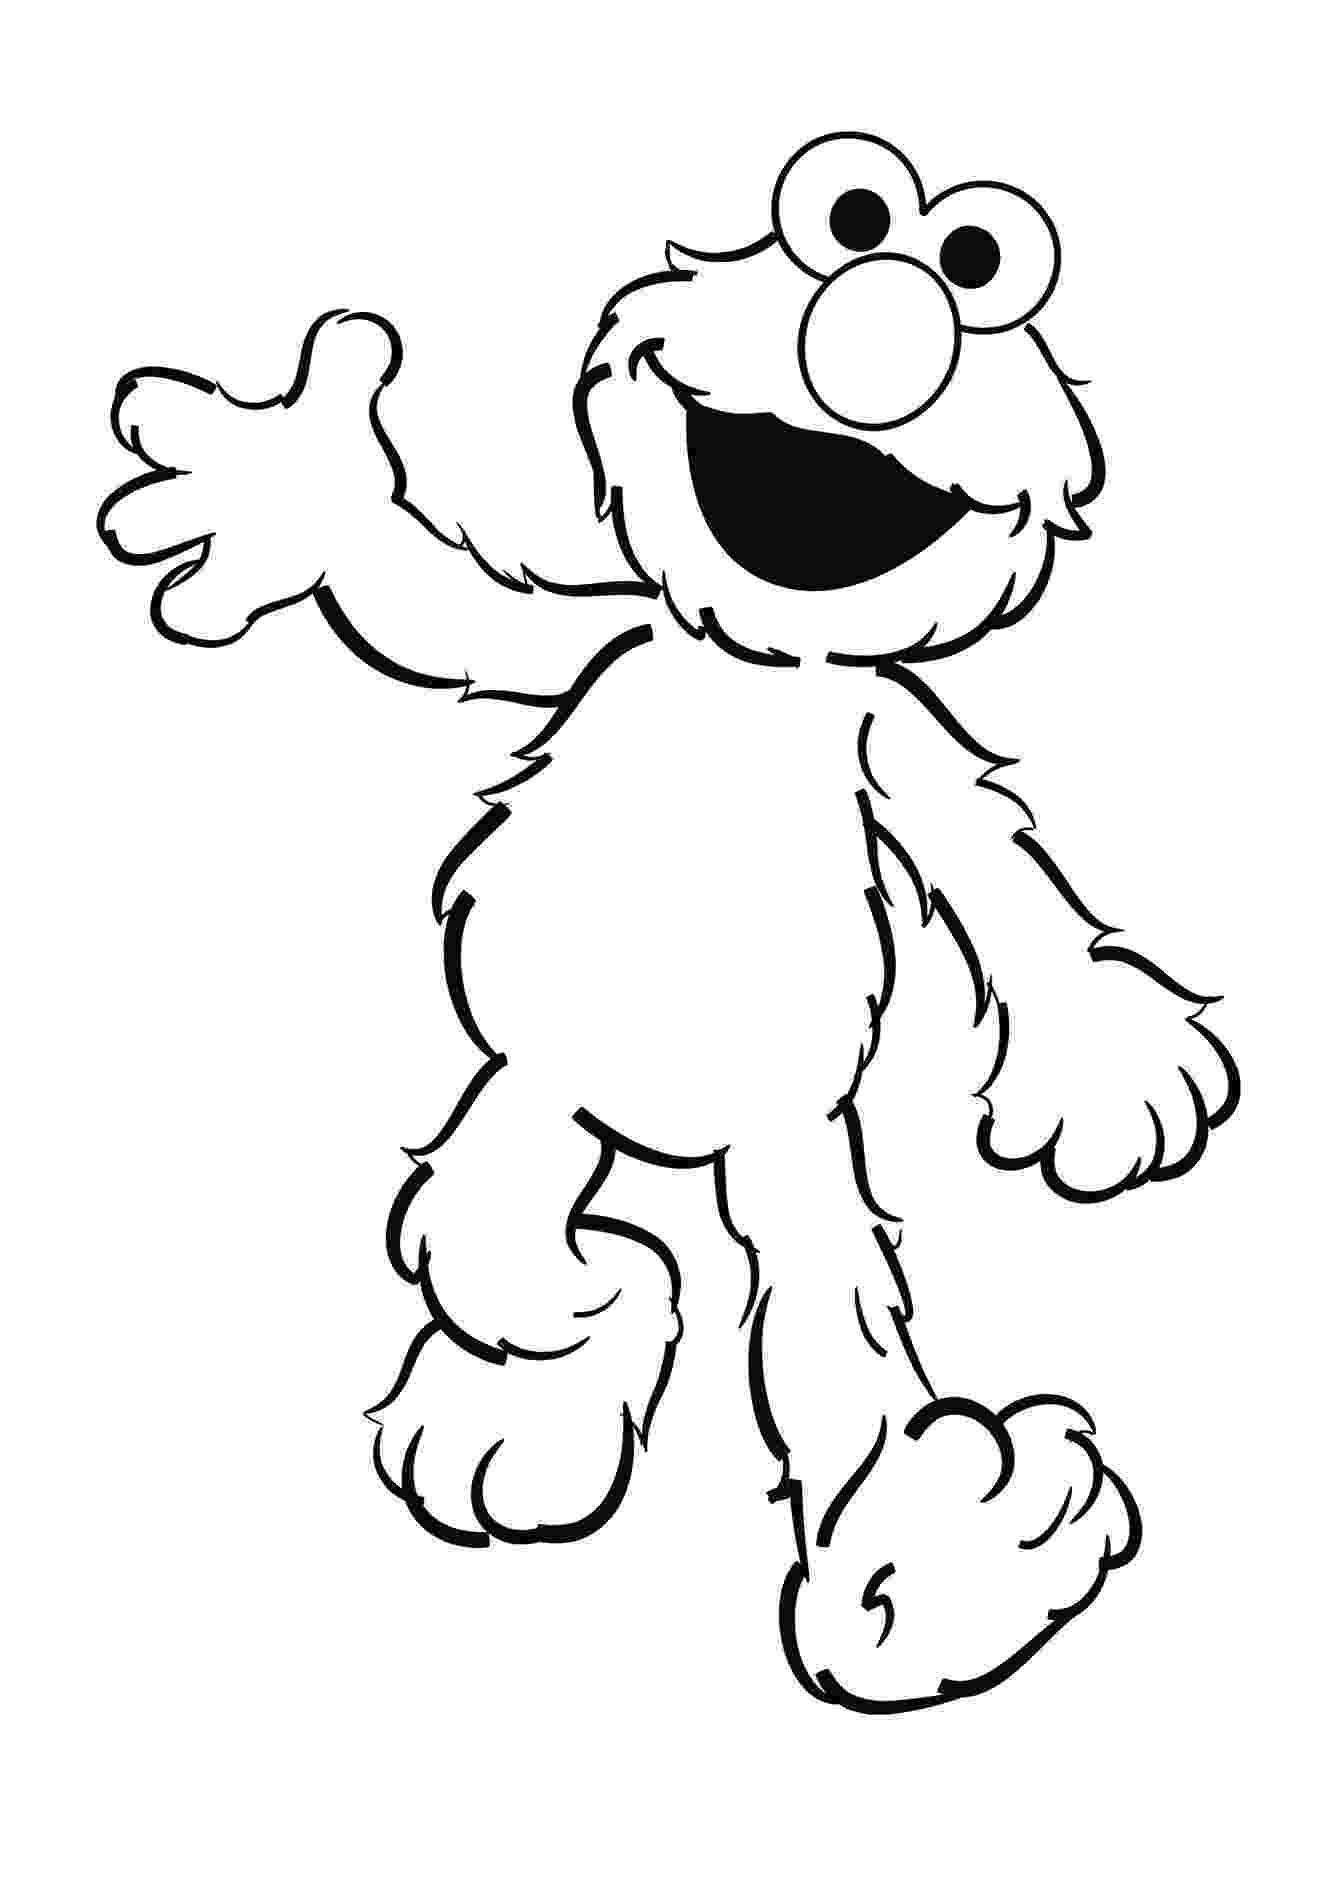 coloring pages of sesame street characters free printable sesame street coloring pages for kids characters pages sesame coloring street of 